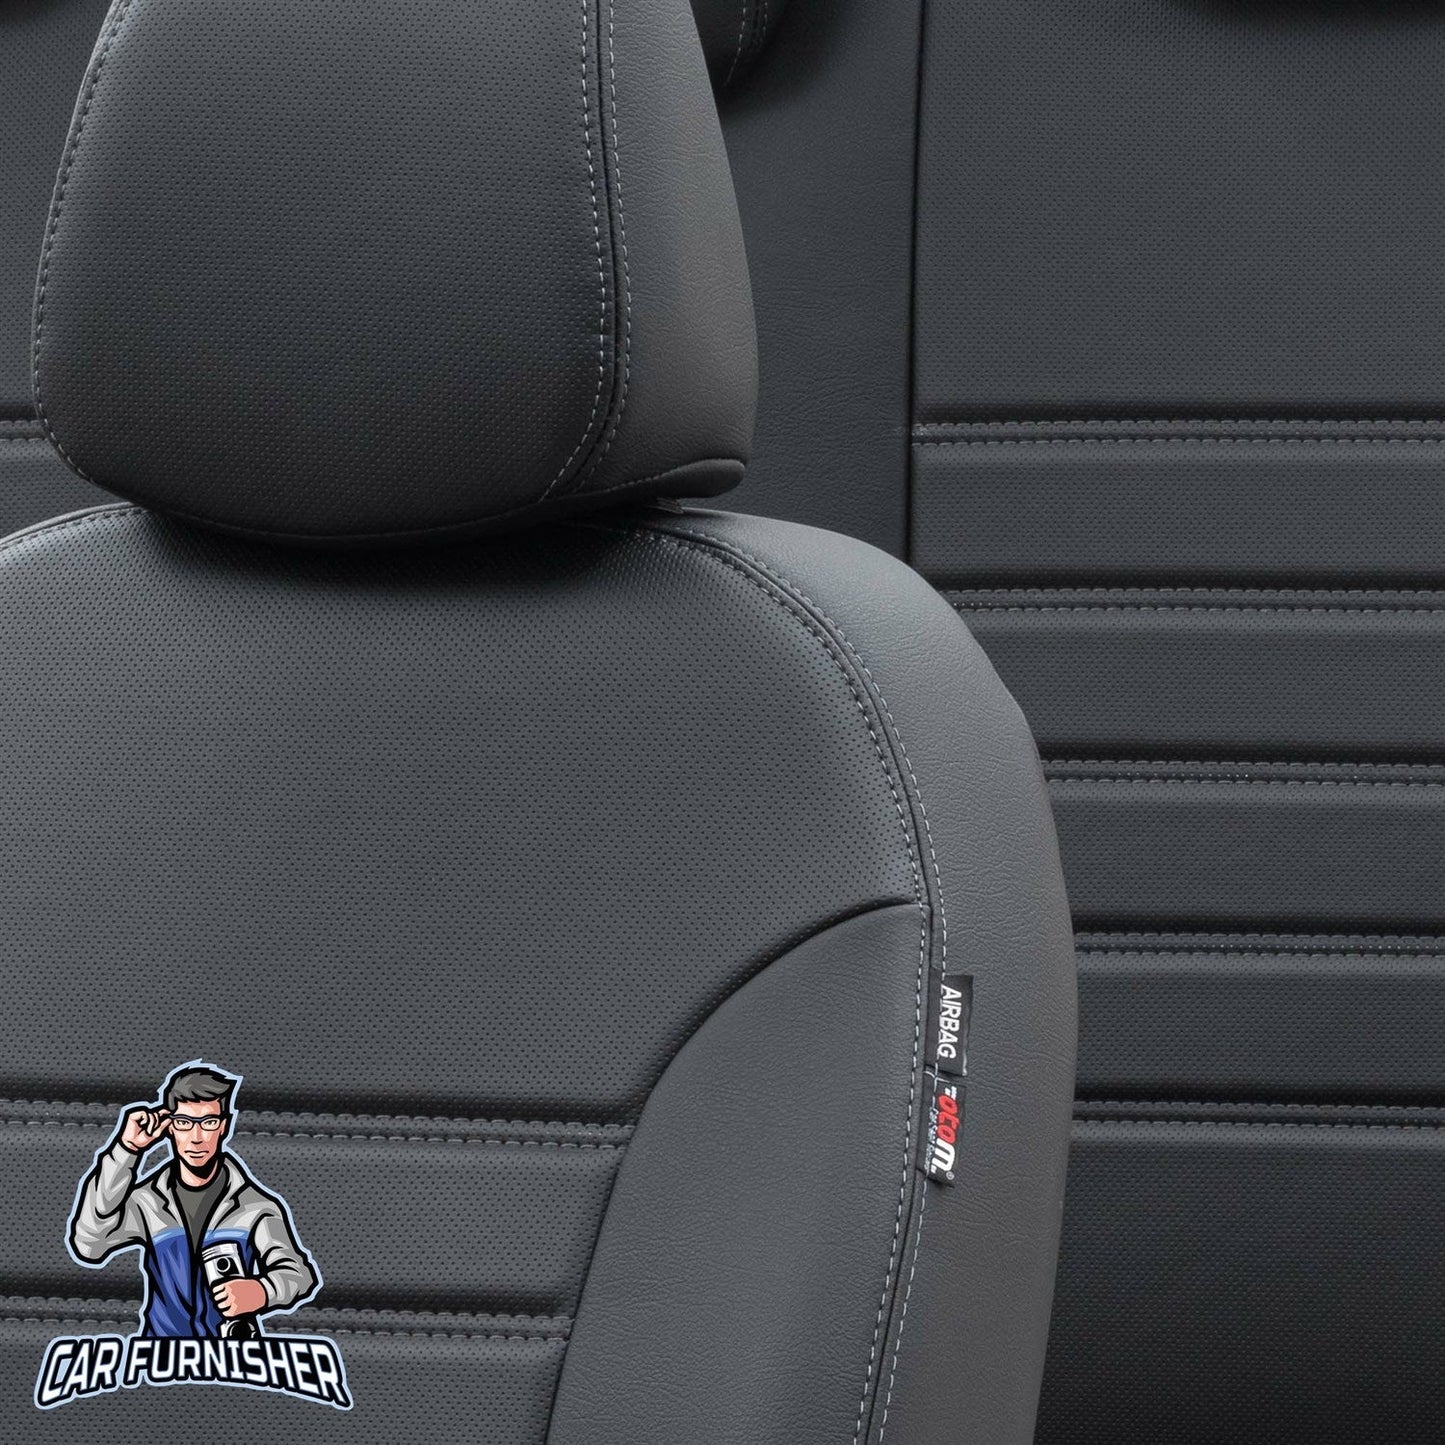 Fiat Stilo Seat Covers Istanbul Leather Design Black Leather